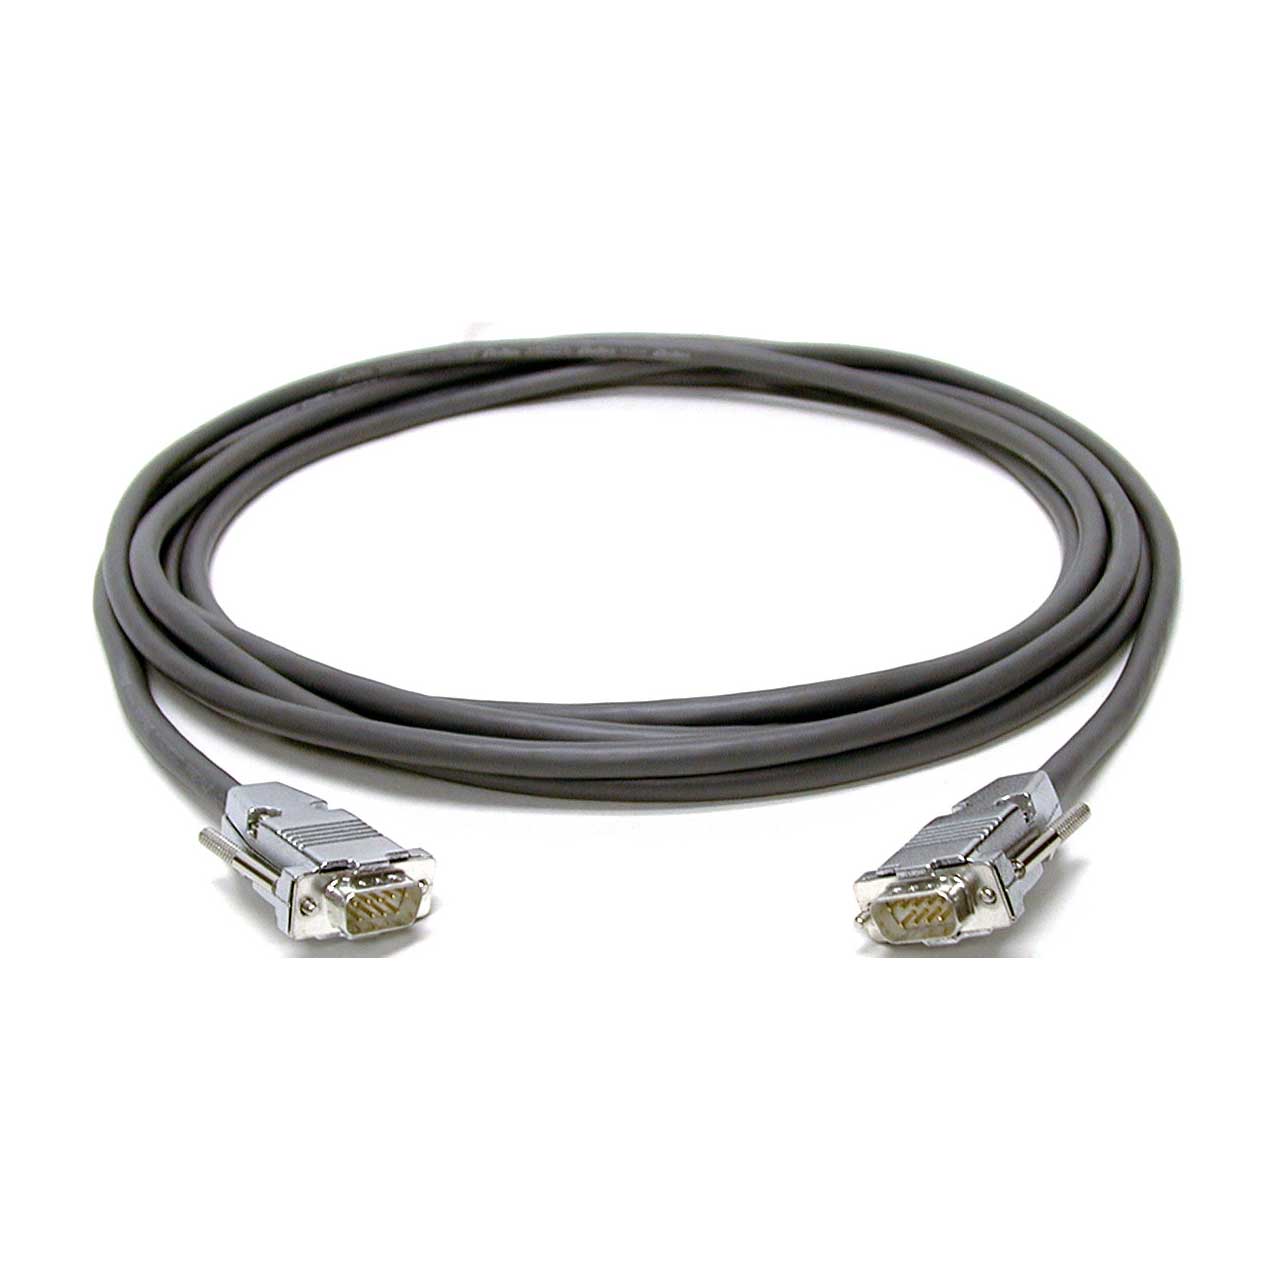 Laird D9M-M-7 Belden 9538 Sony RCC-G-Equivalent 9-Pin D-Sub Male to Male RS-422 Control Cable - 7 Foot